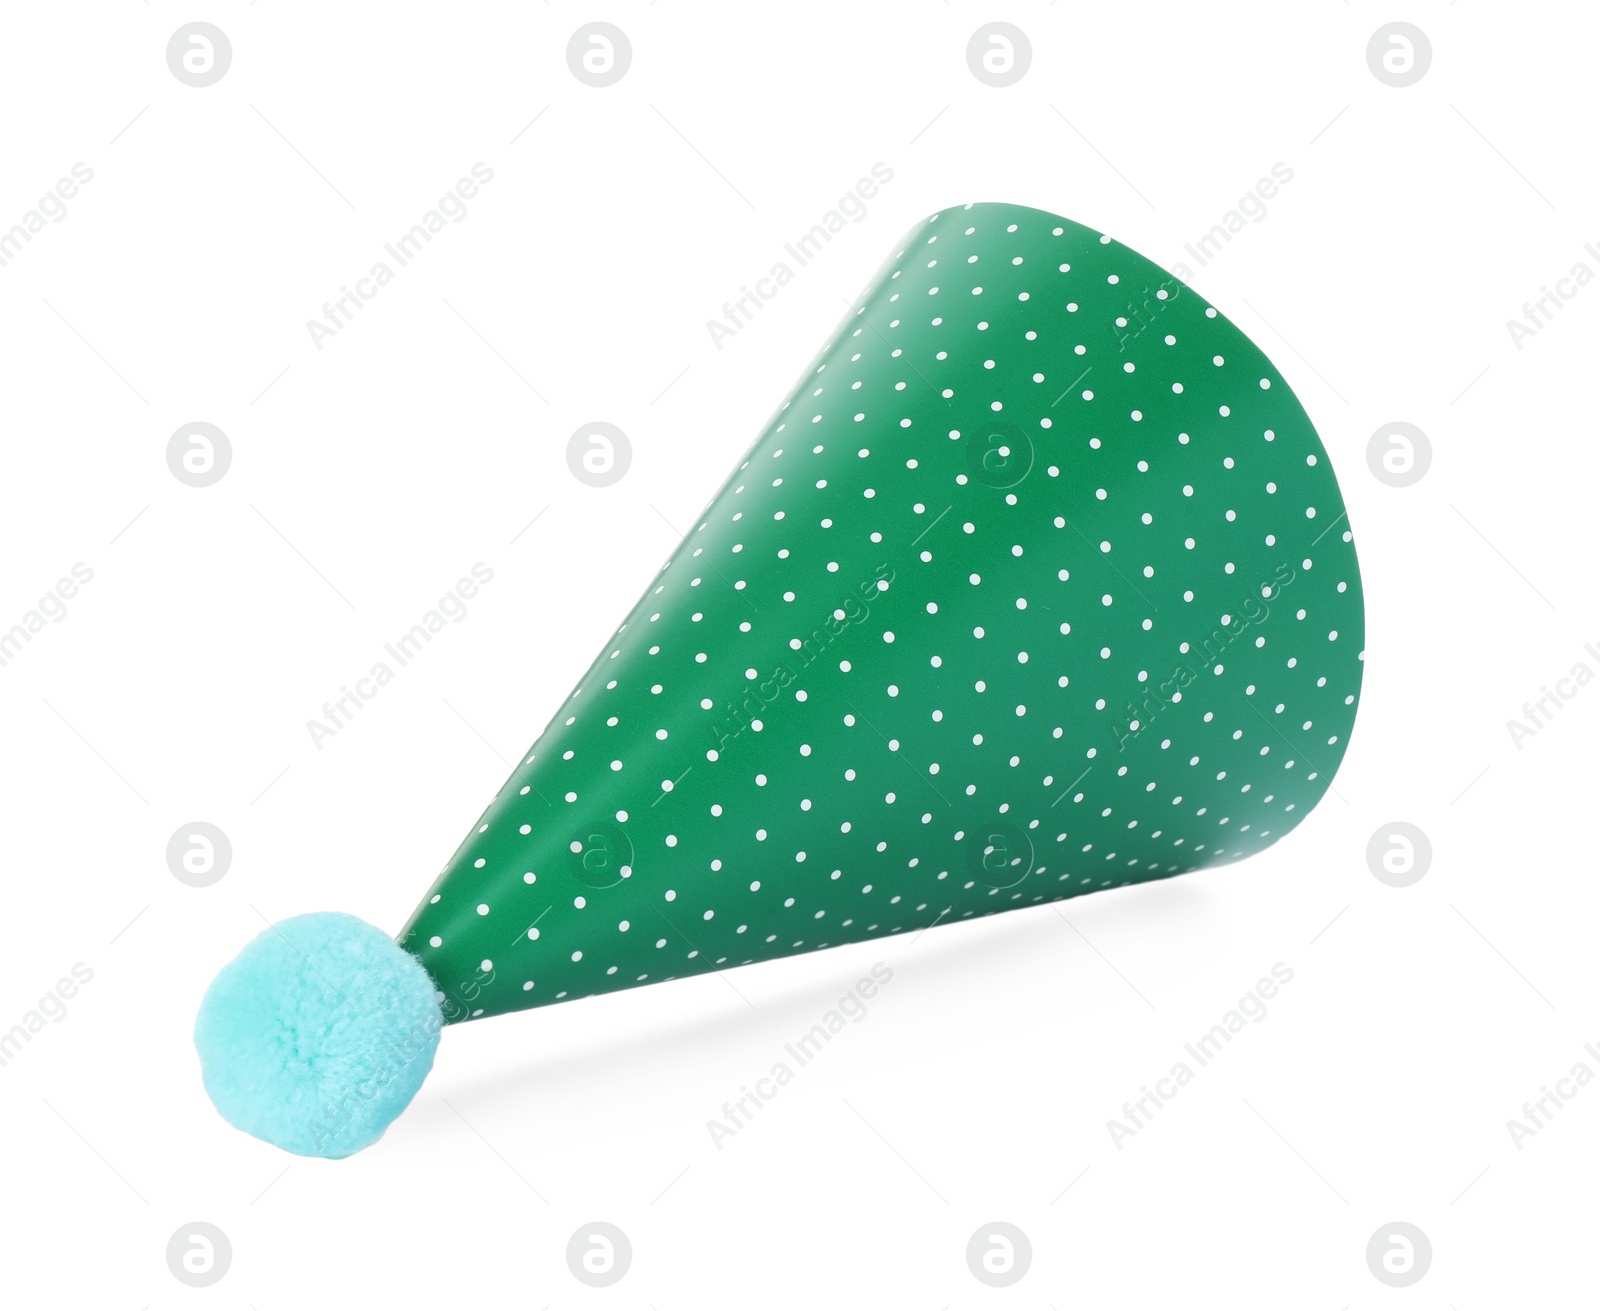 Photo of One colorful party hat isolated on white